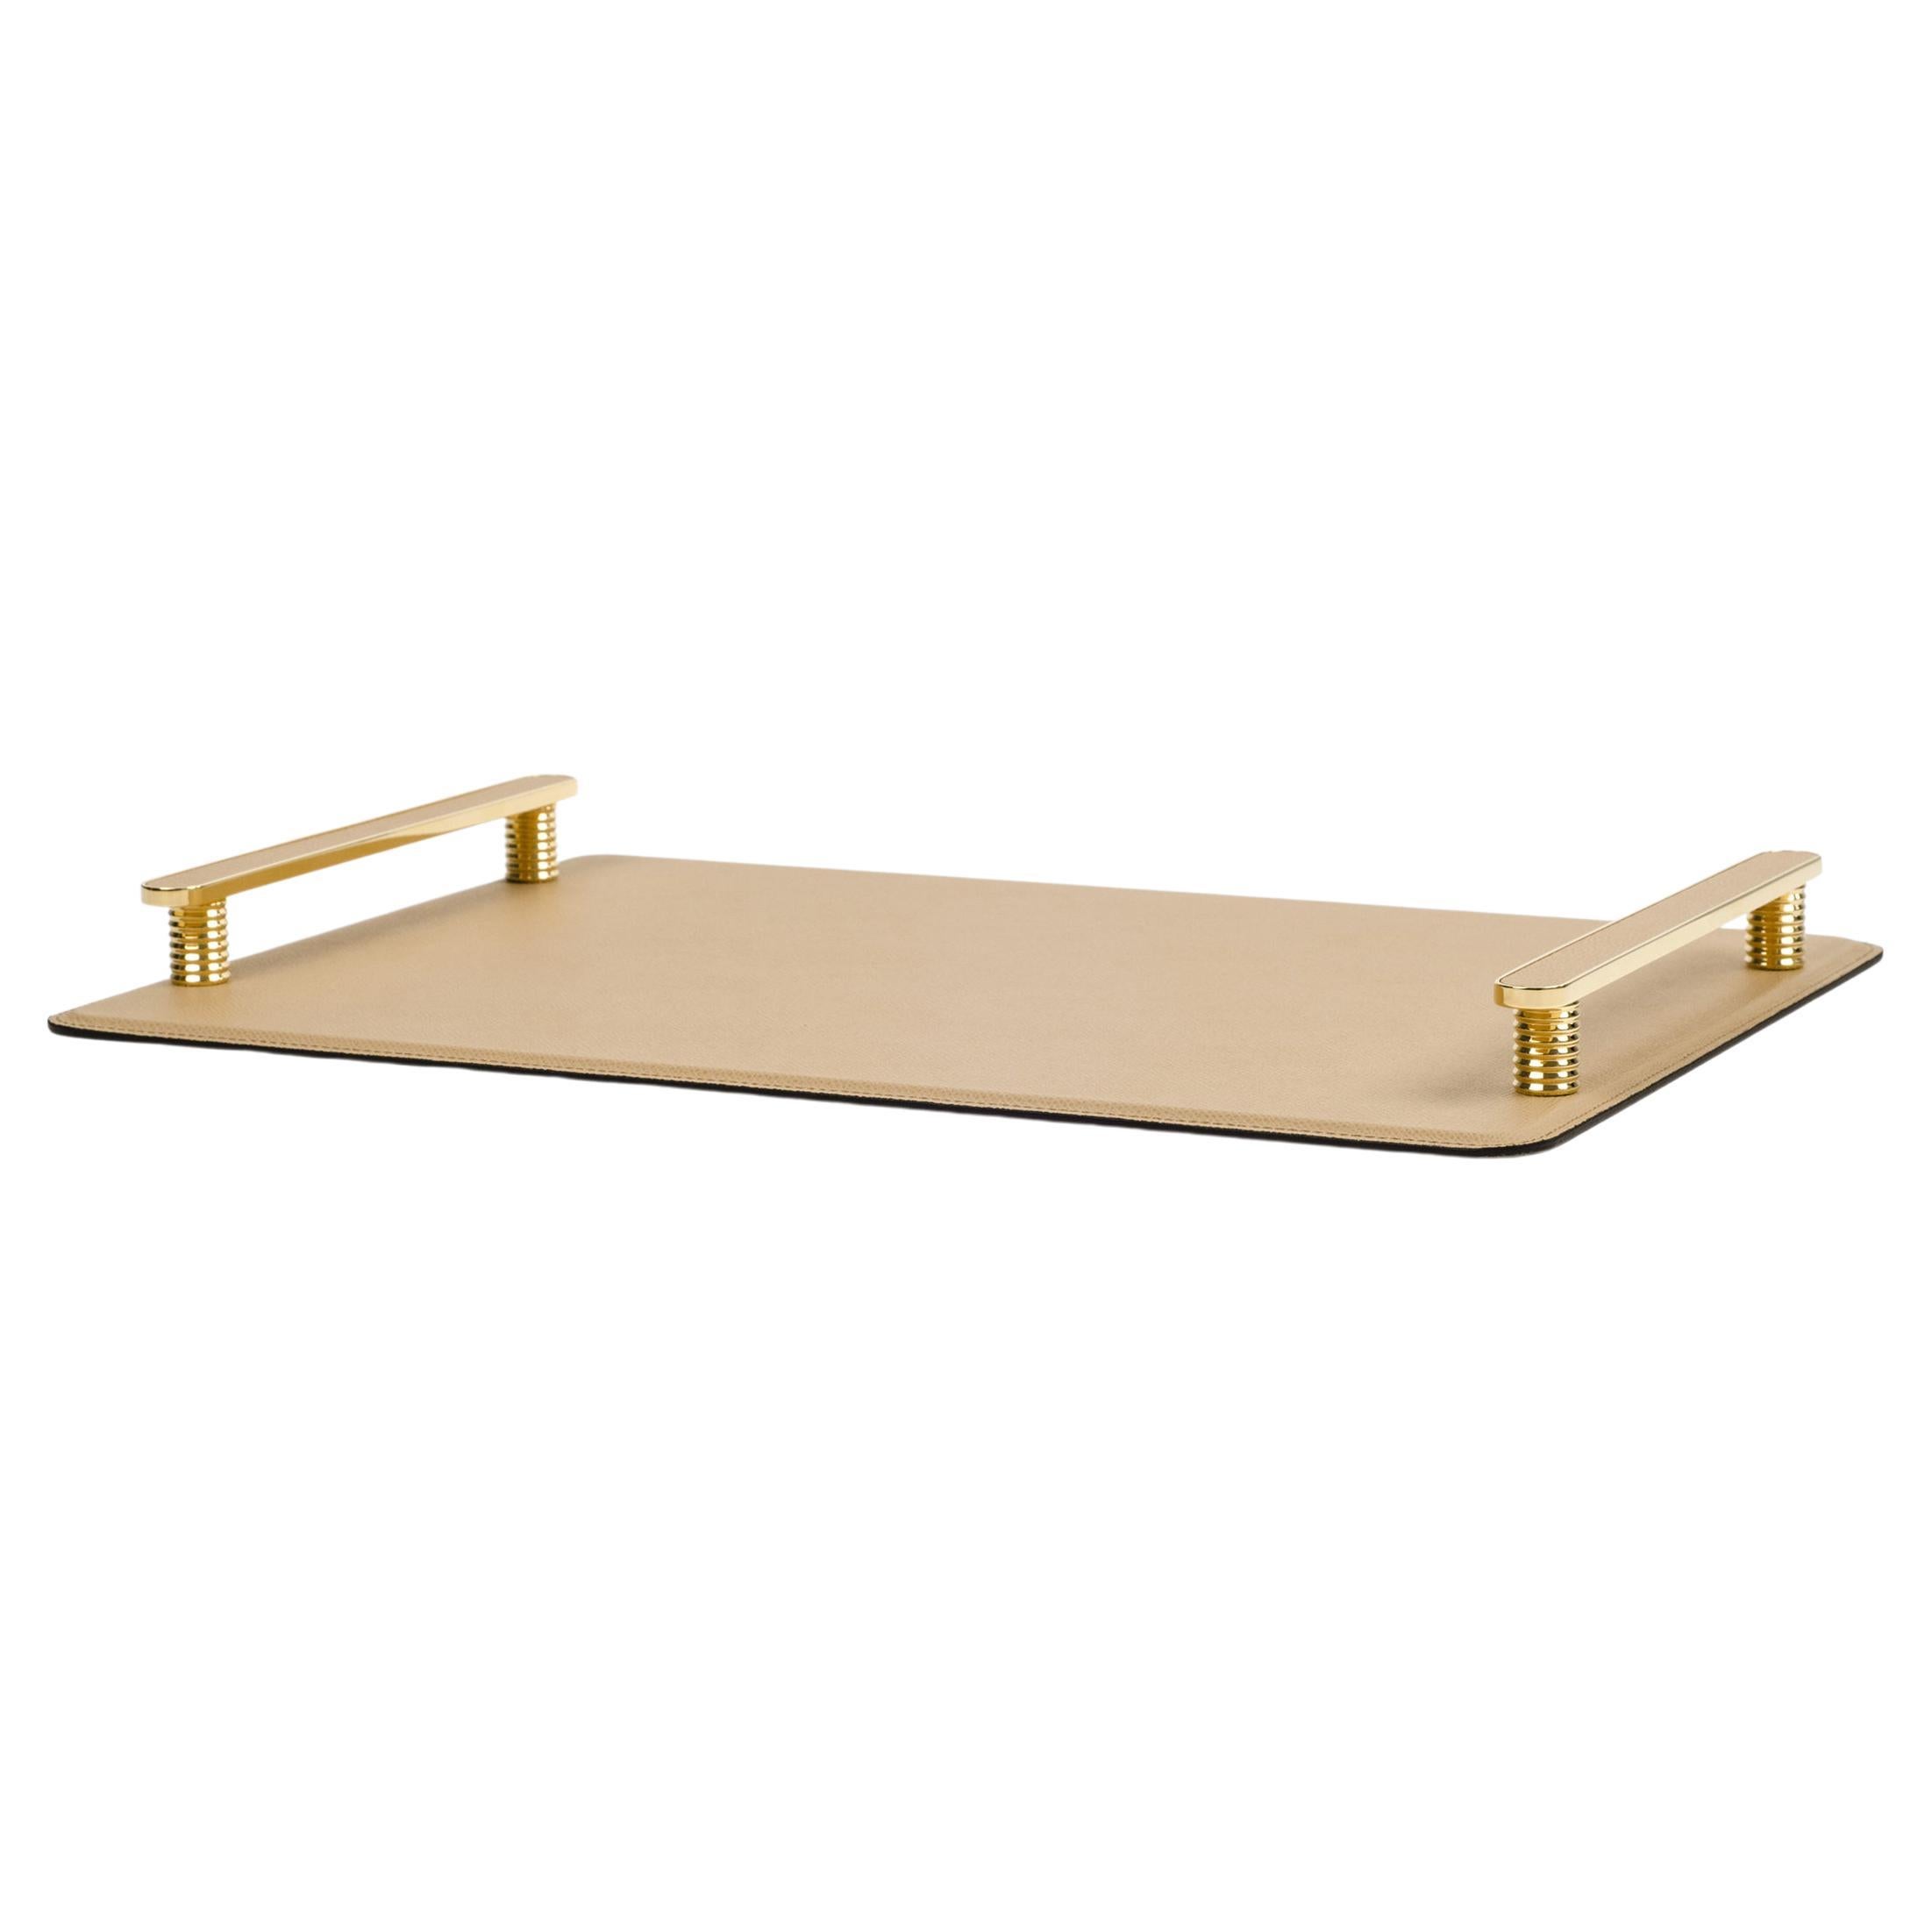 21st Century Venaria Serving Leather Tray with Brass Handles Handmade in Italy